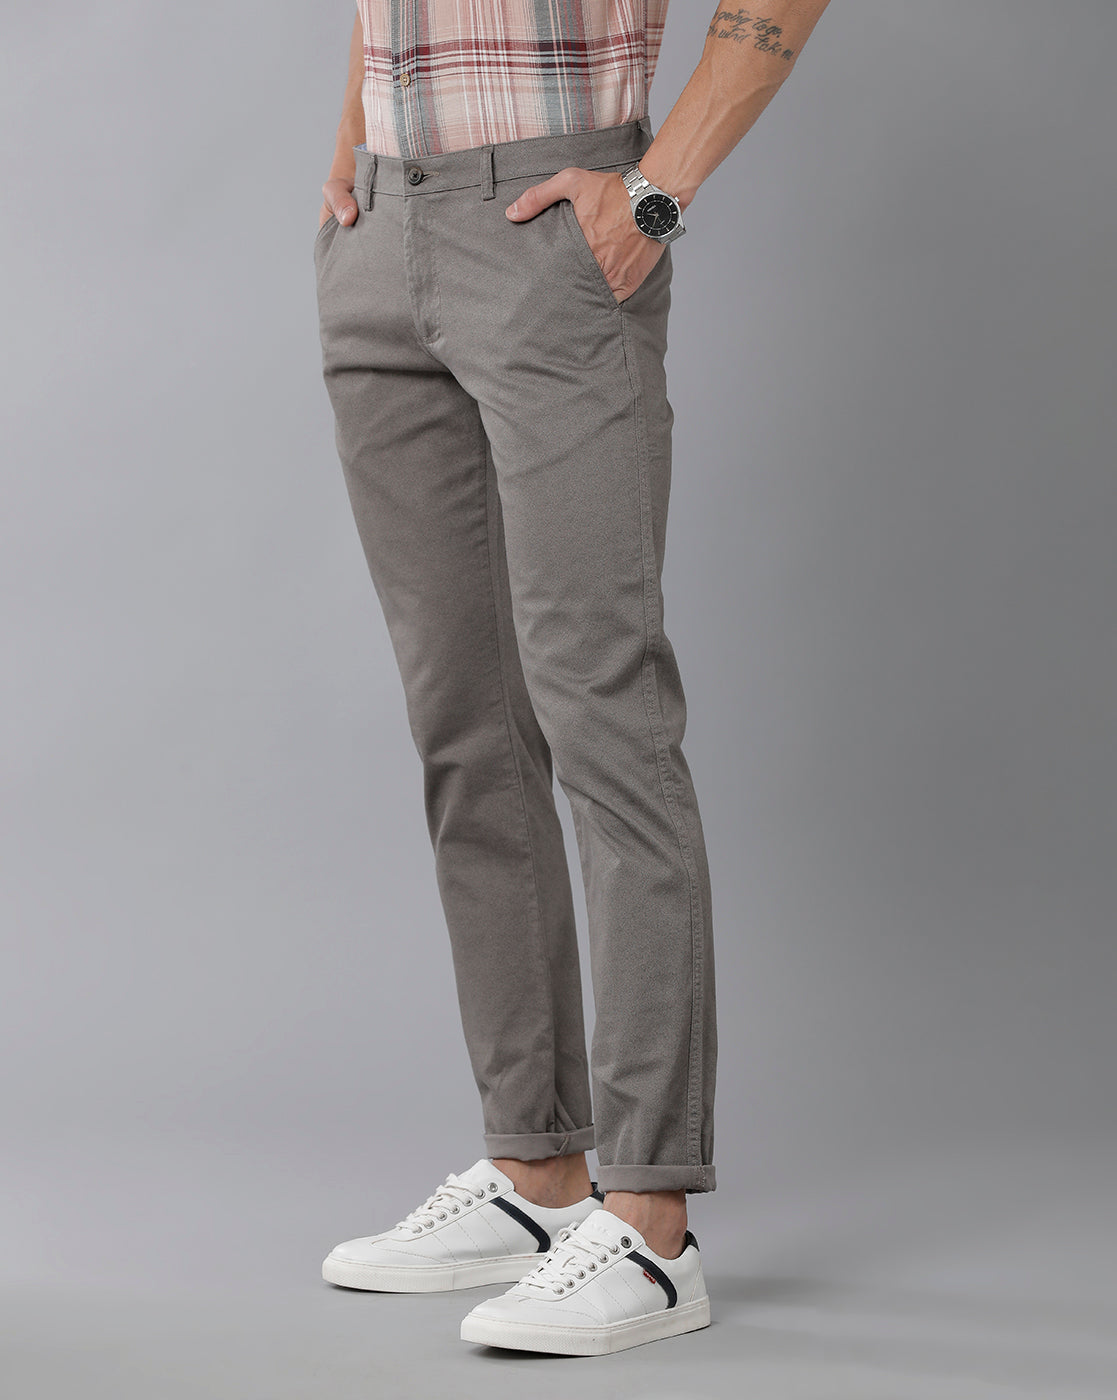 PalloStyle Regular Fit Women Grey Trousers  Buy PalloStyle Regular Fit Women  Grey Trousers Online at Best Prices in India  Flipkartcom